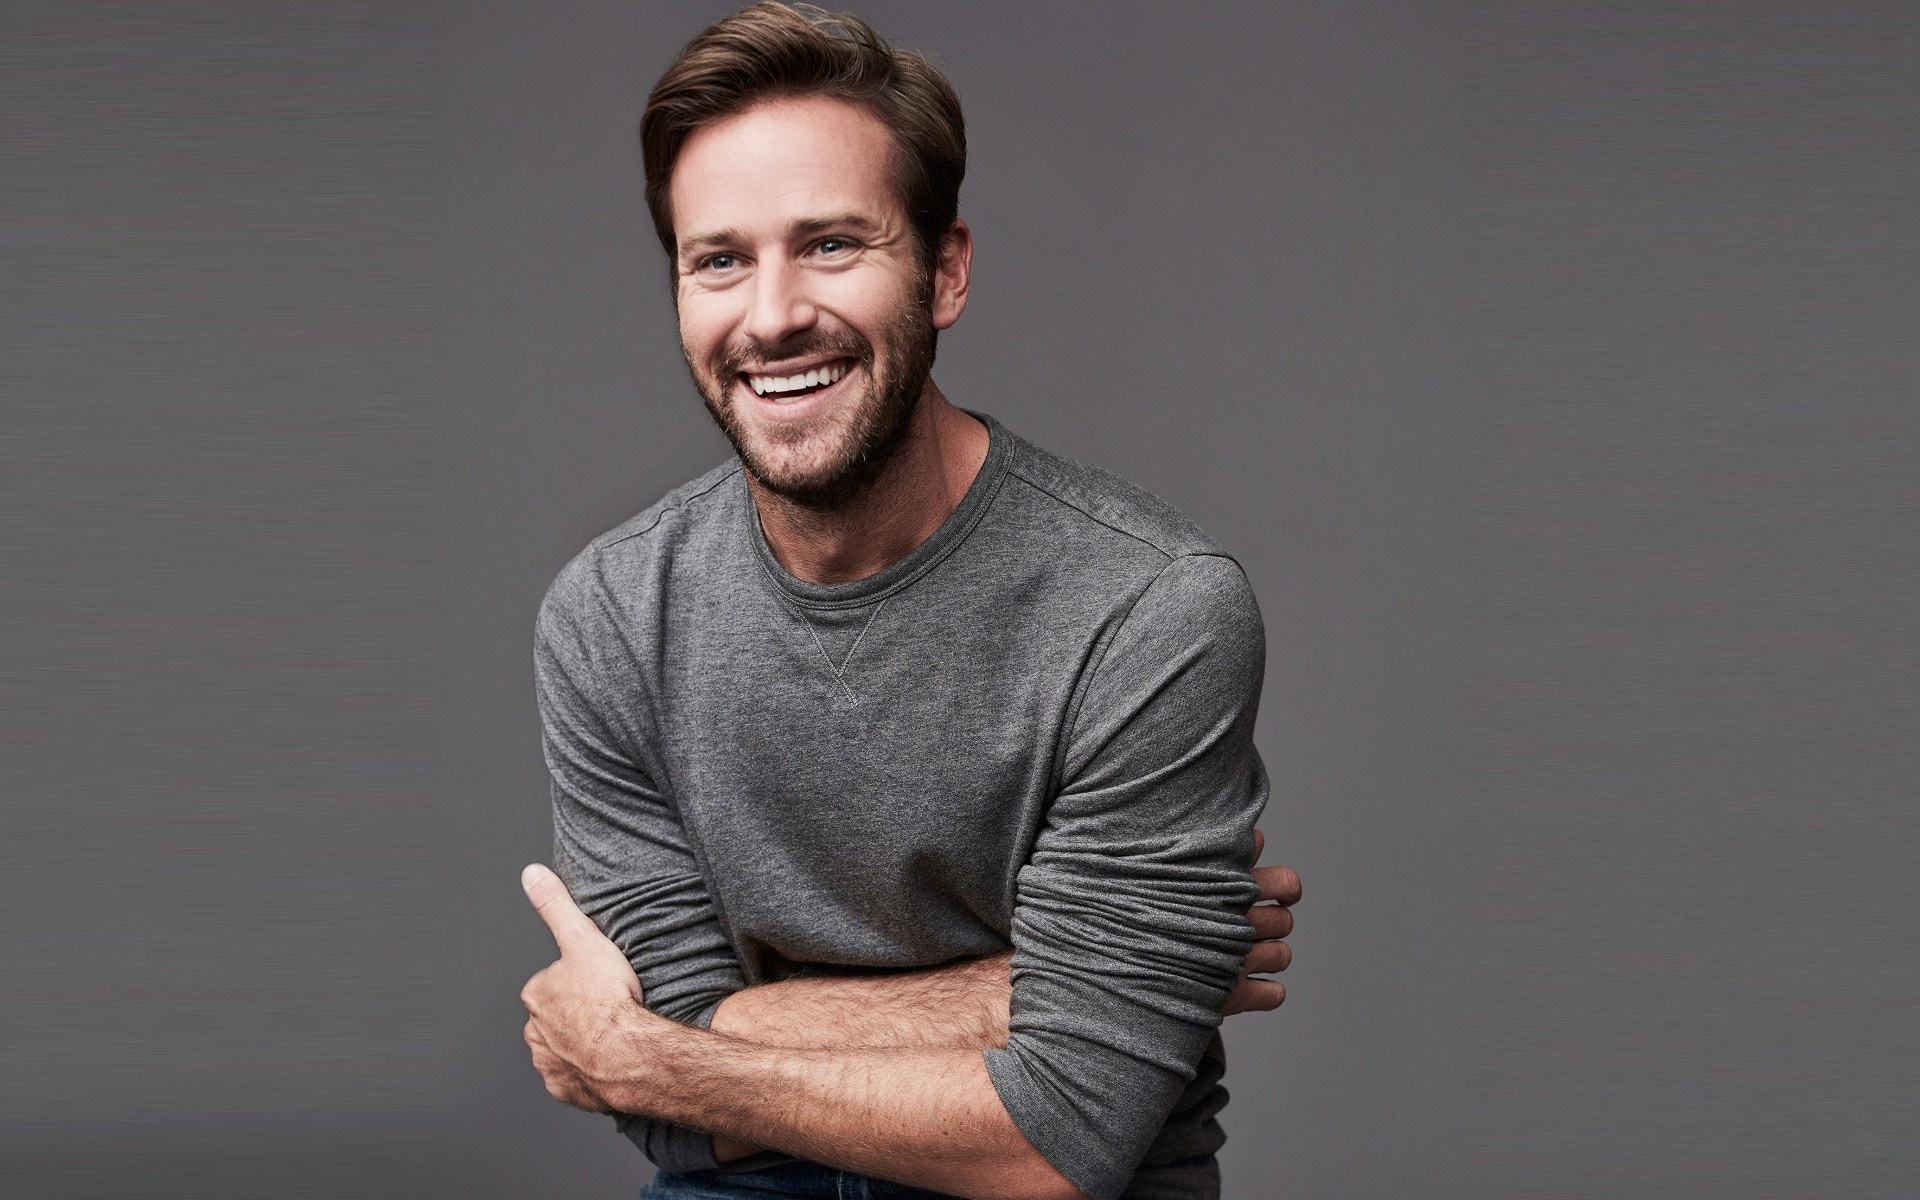 Armie Hammer movies, Actor portrait, American stars photoshoot, High-quality wallpapers, 1920x1200 HD Desktop